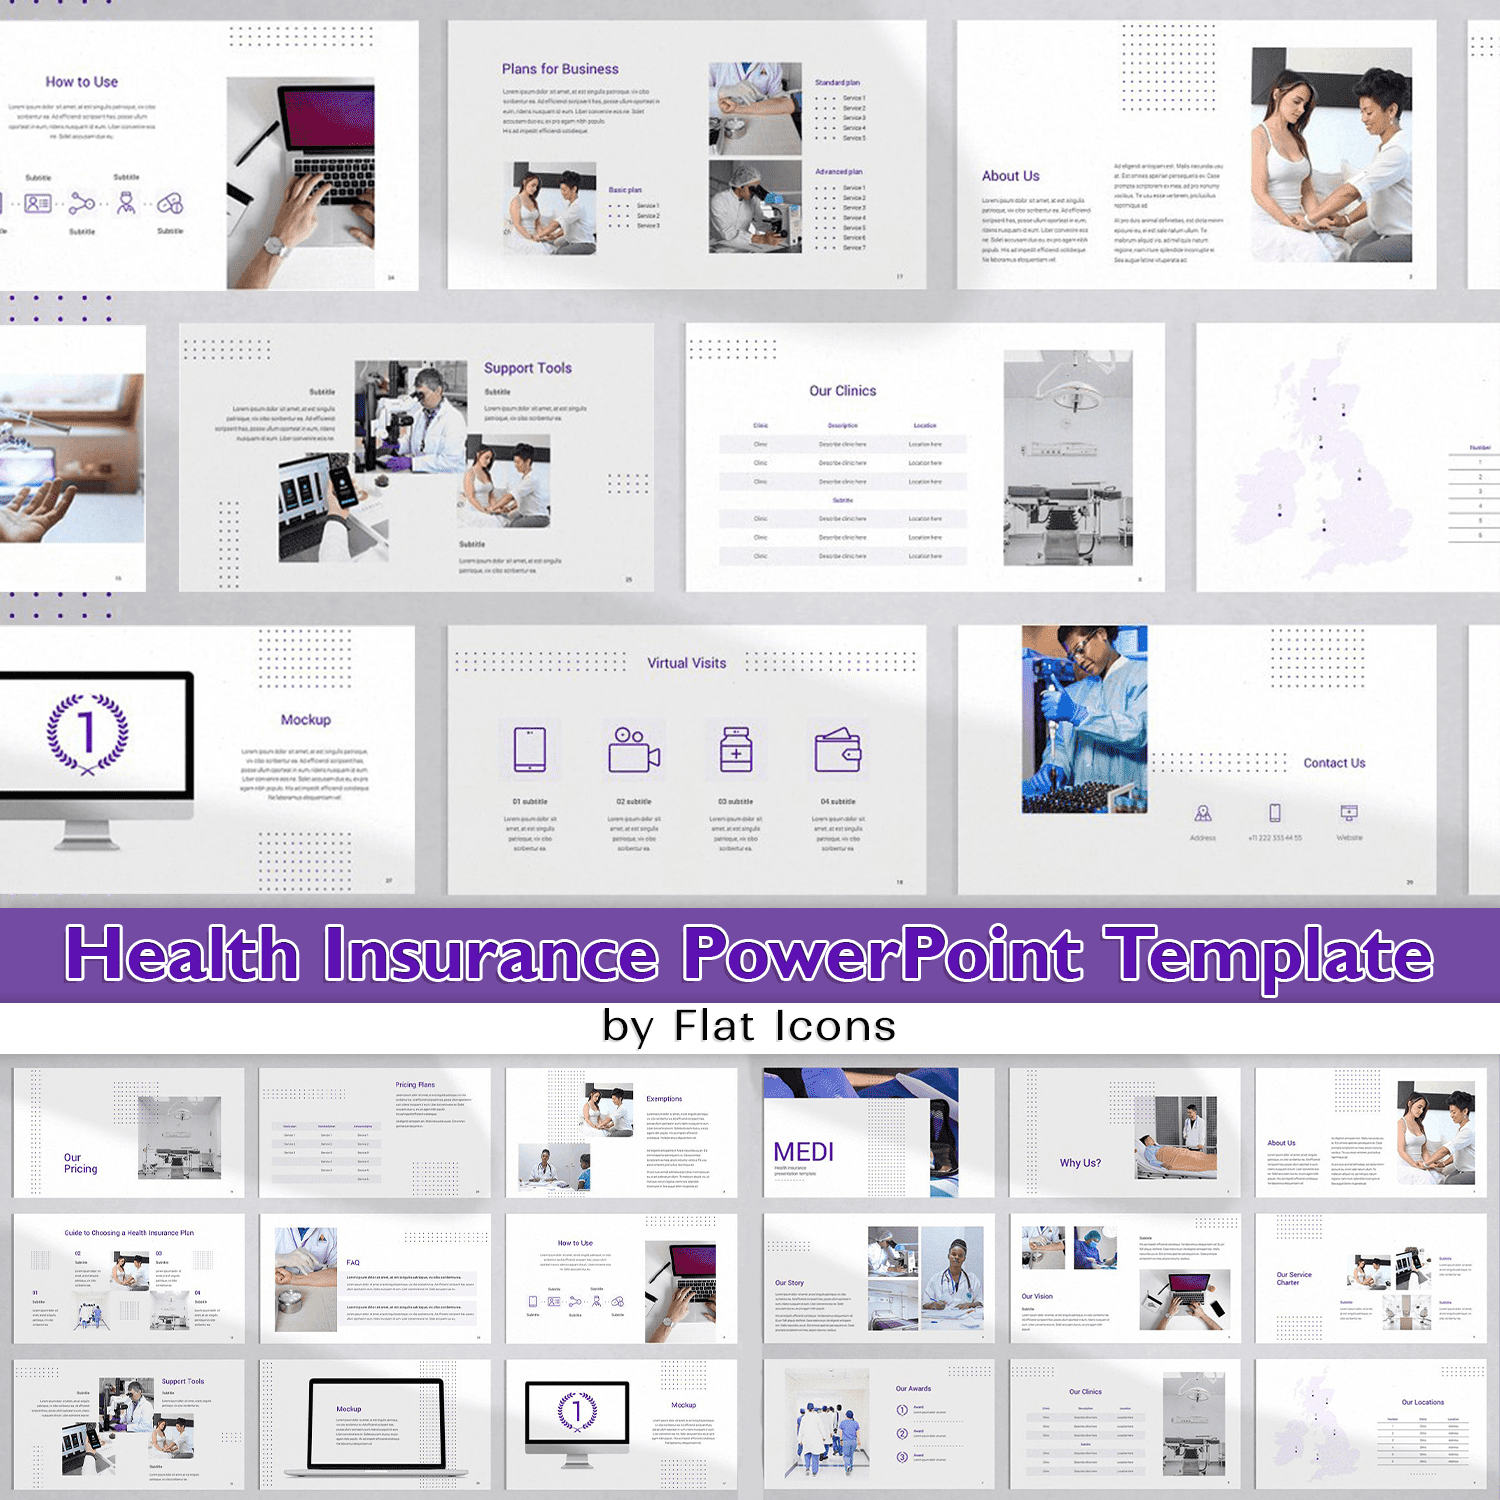 Health Insurance PowerPoint Template cover.